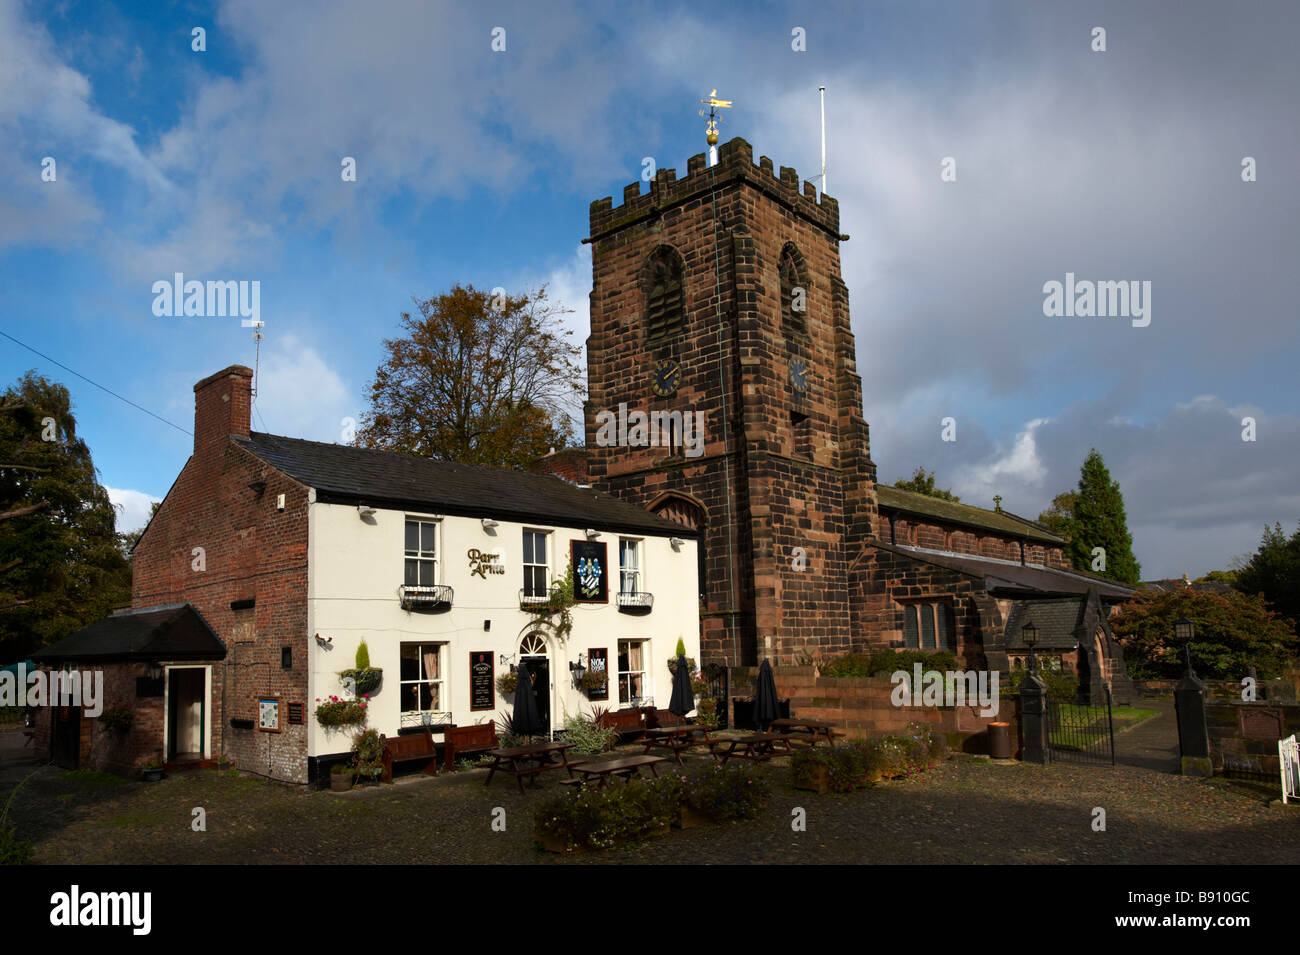 Parr Arms Grappenhall Cheshire UK Stock Photo